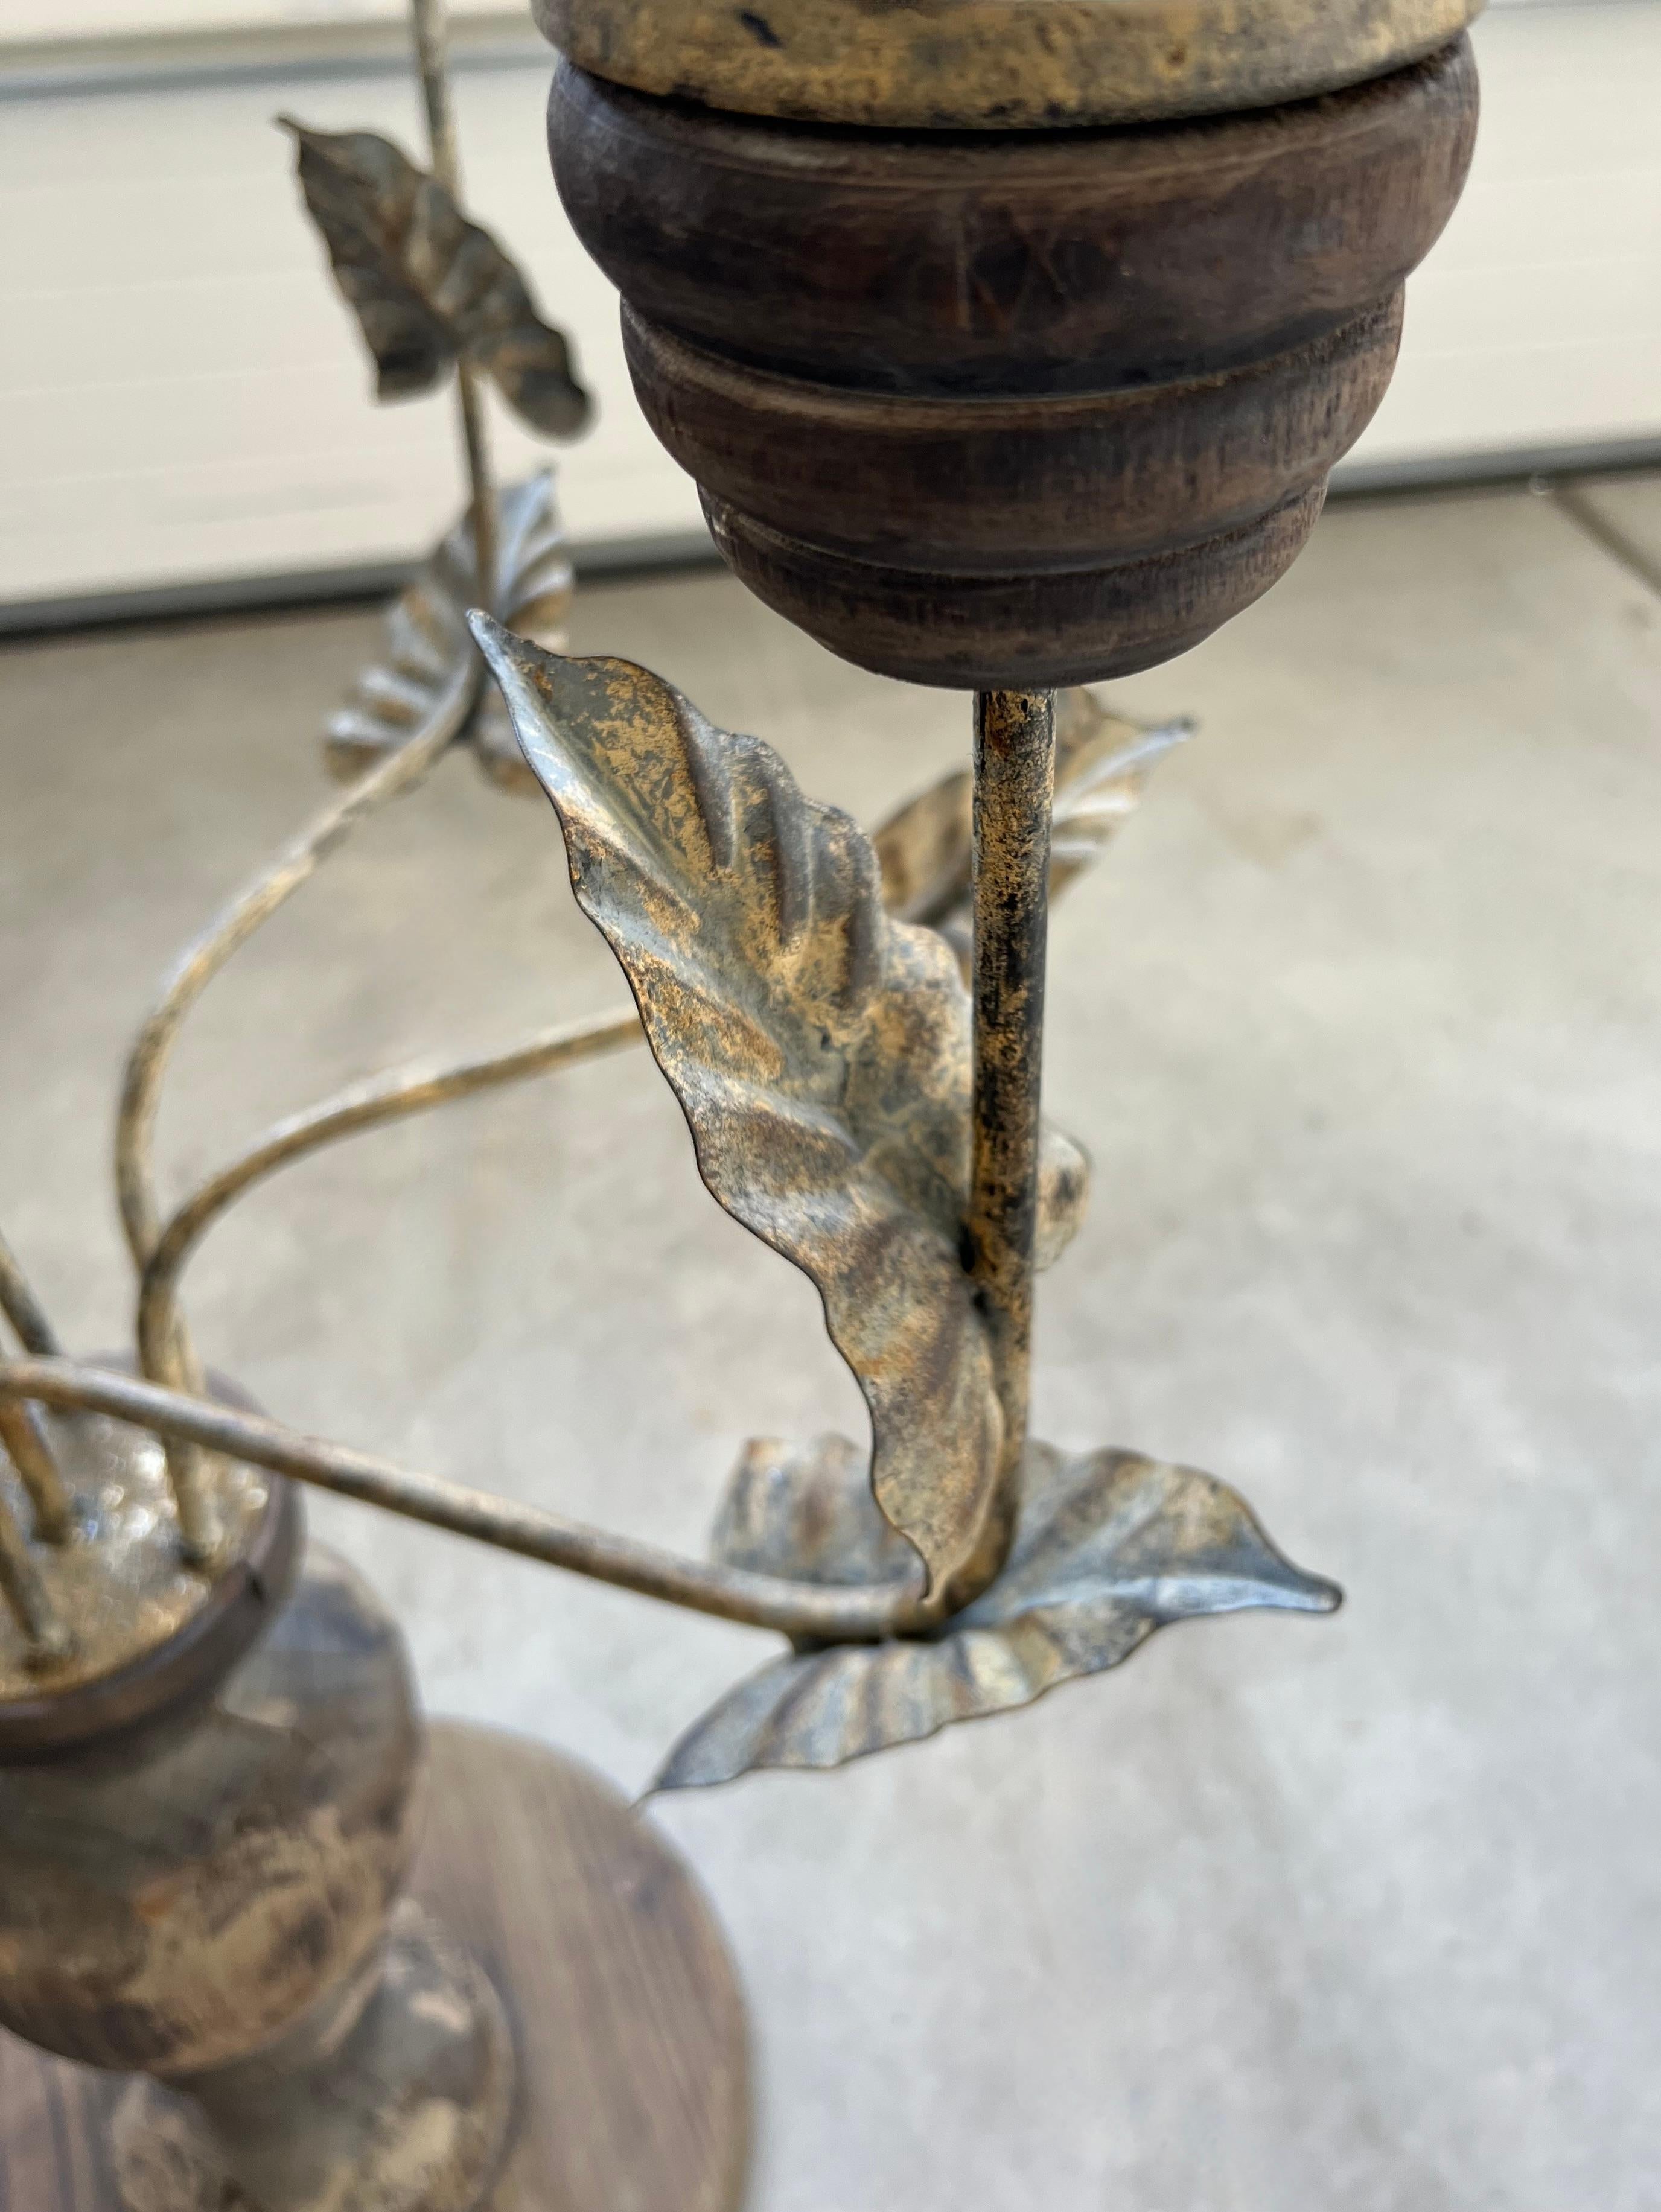 This giant candelabra holds seven pillar candles.  Six surround a candle holder that sits higher than the others in the middle. It has distressed painted metal arms and a sturdy rustic wood base.  The arms have metal foliage with distressed gilded